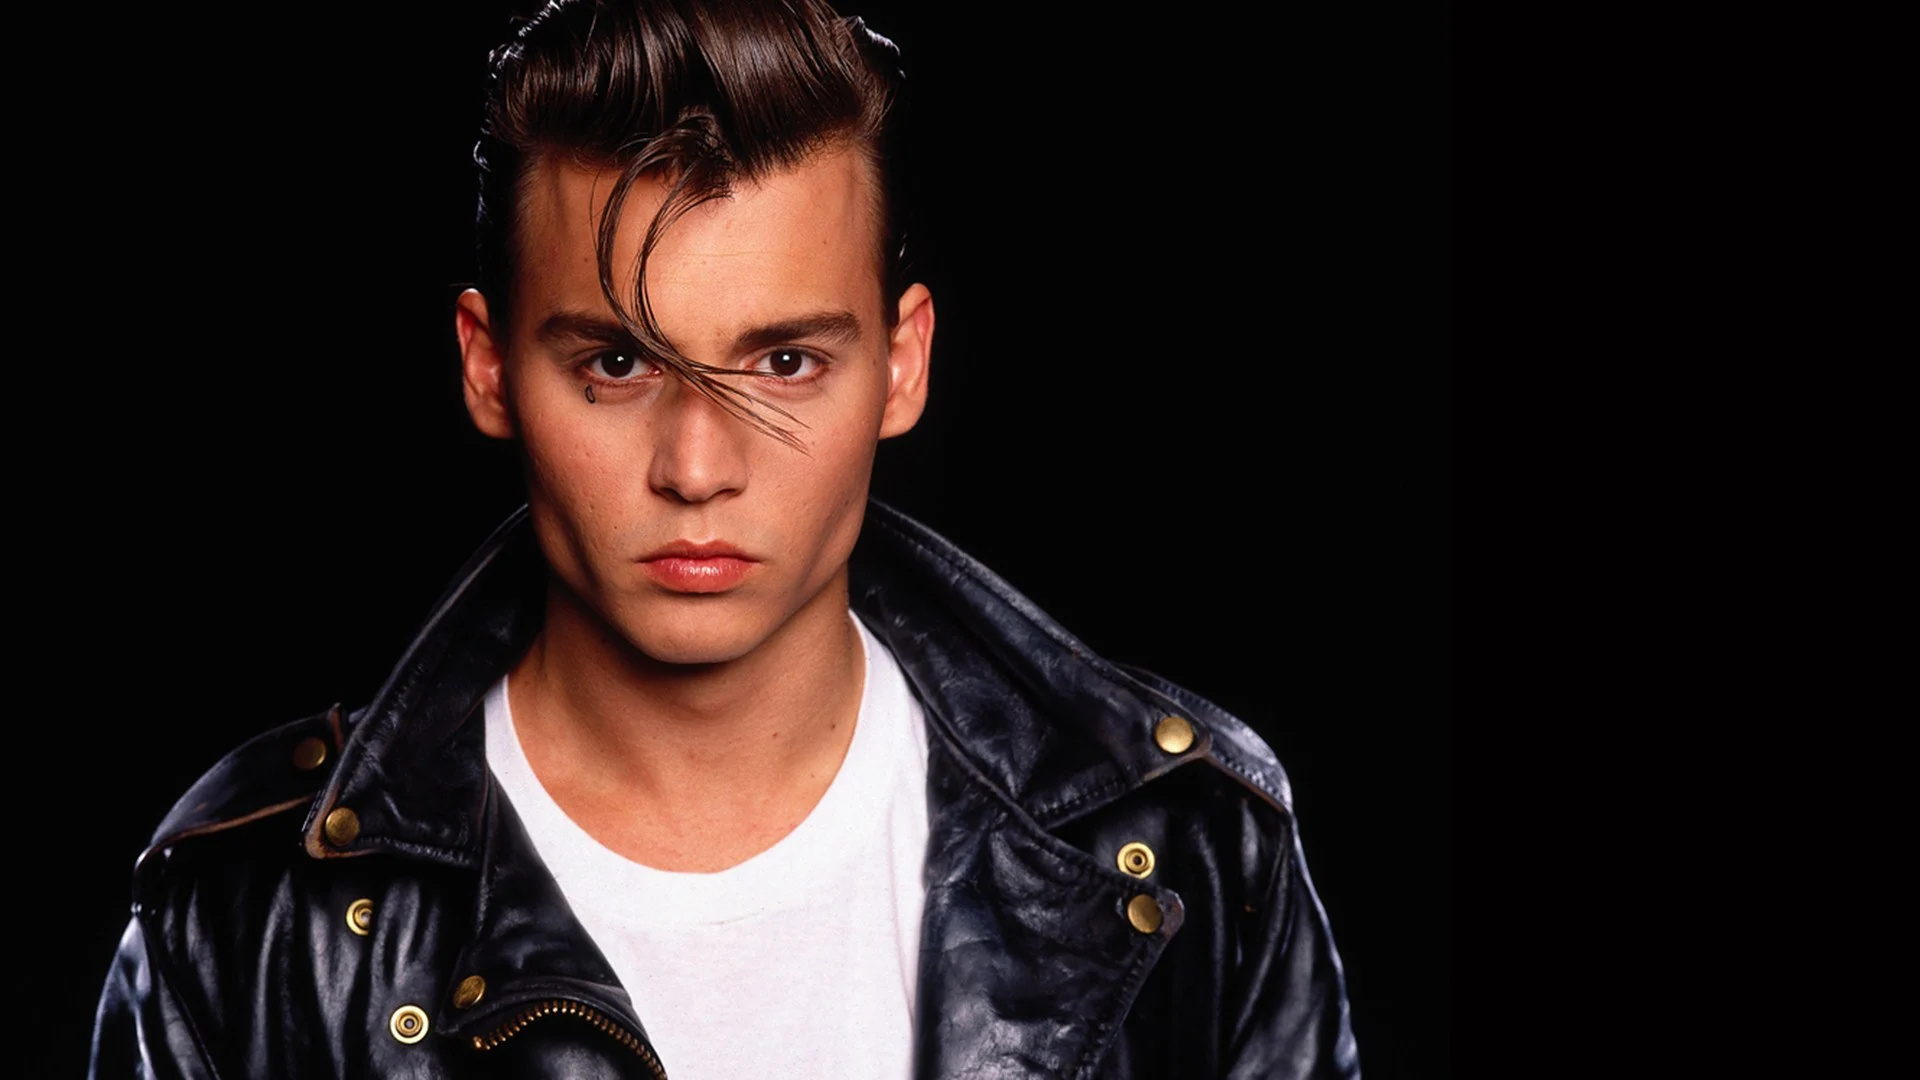 Johnny Depp: Cry-Baby, A 1990 American teen musical romantic comedy, Wade “Cry-Baby” Walker. 1920x1080 Full HD Wallpaper.